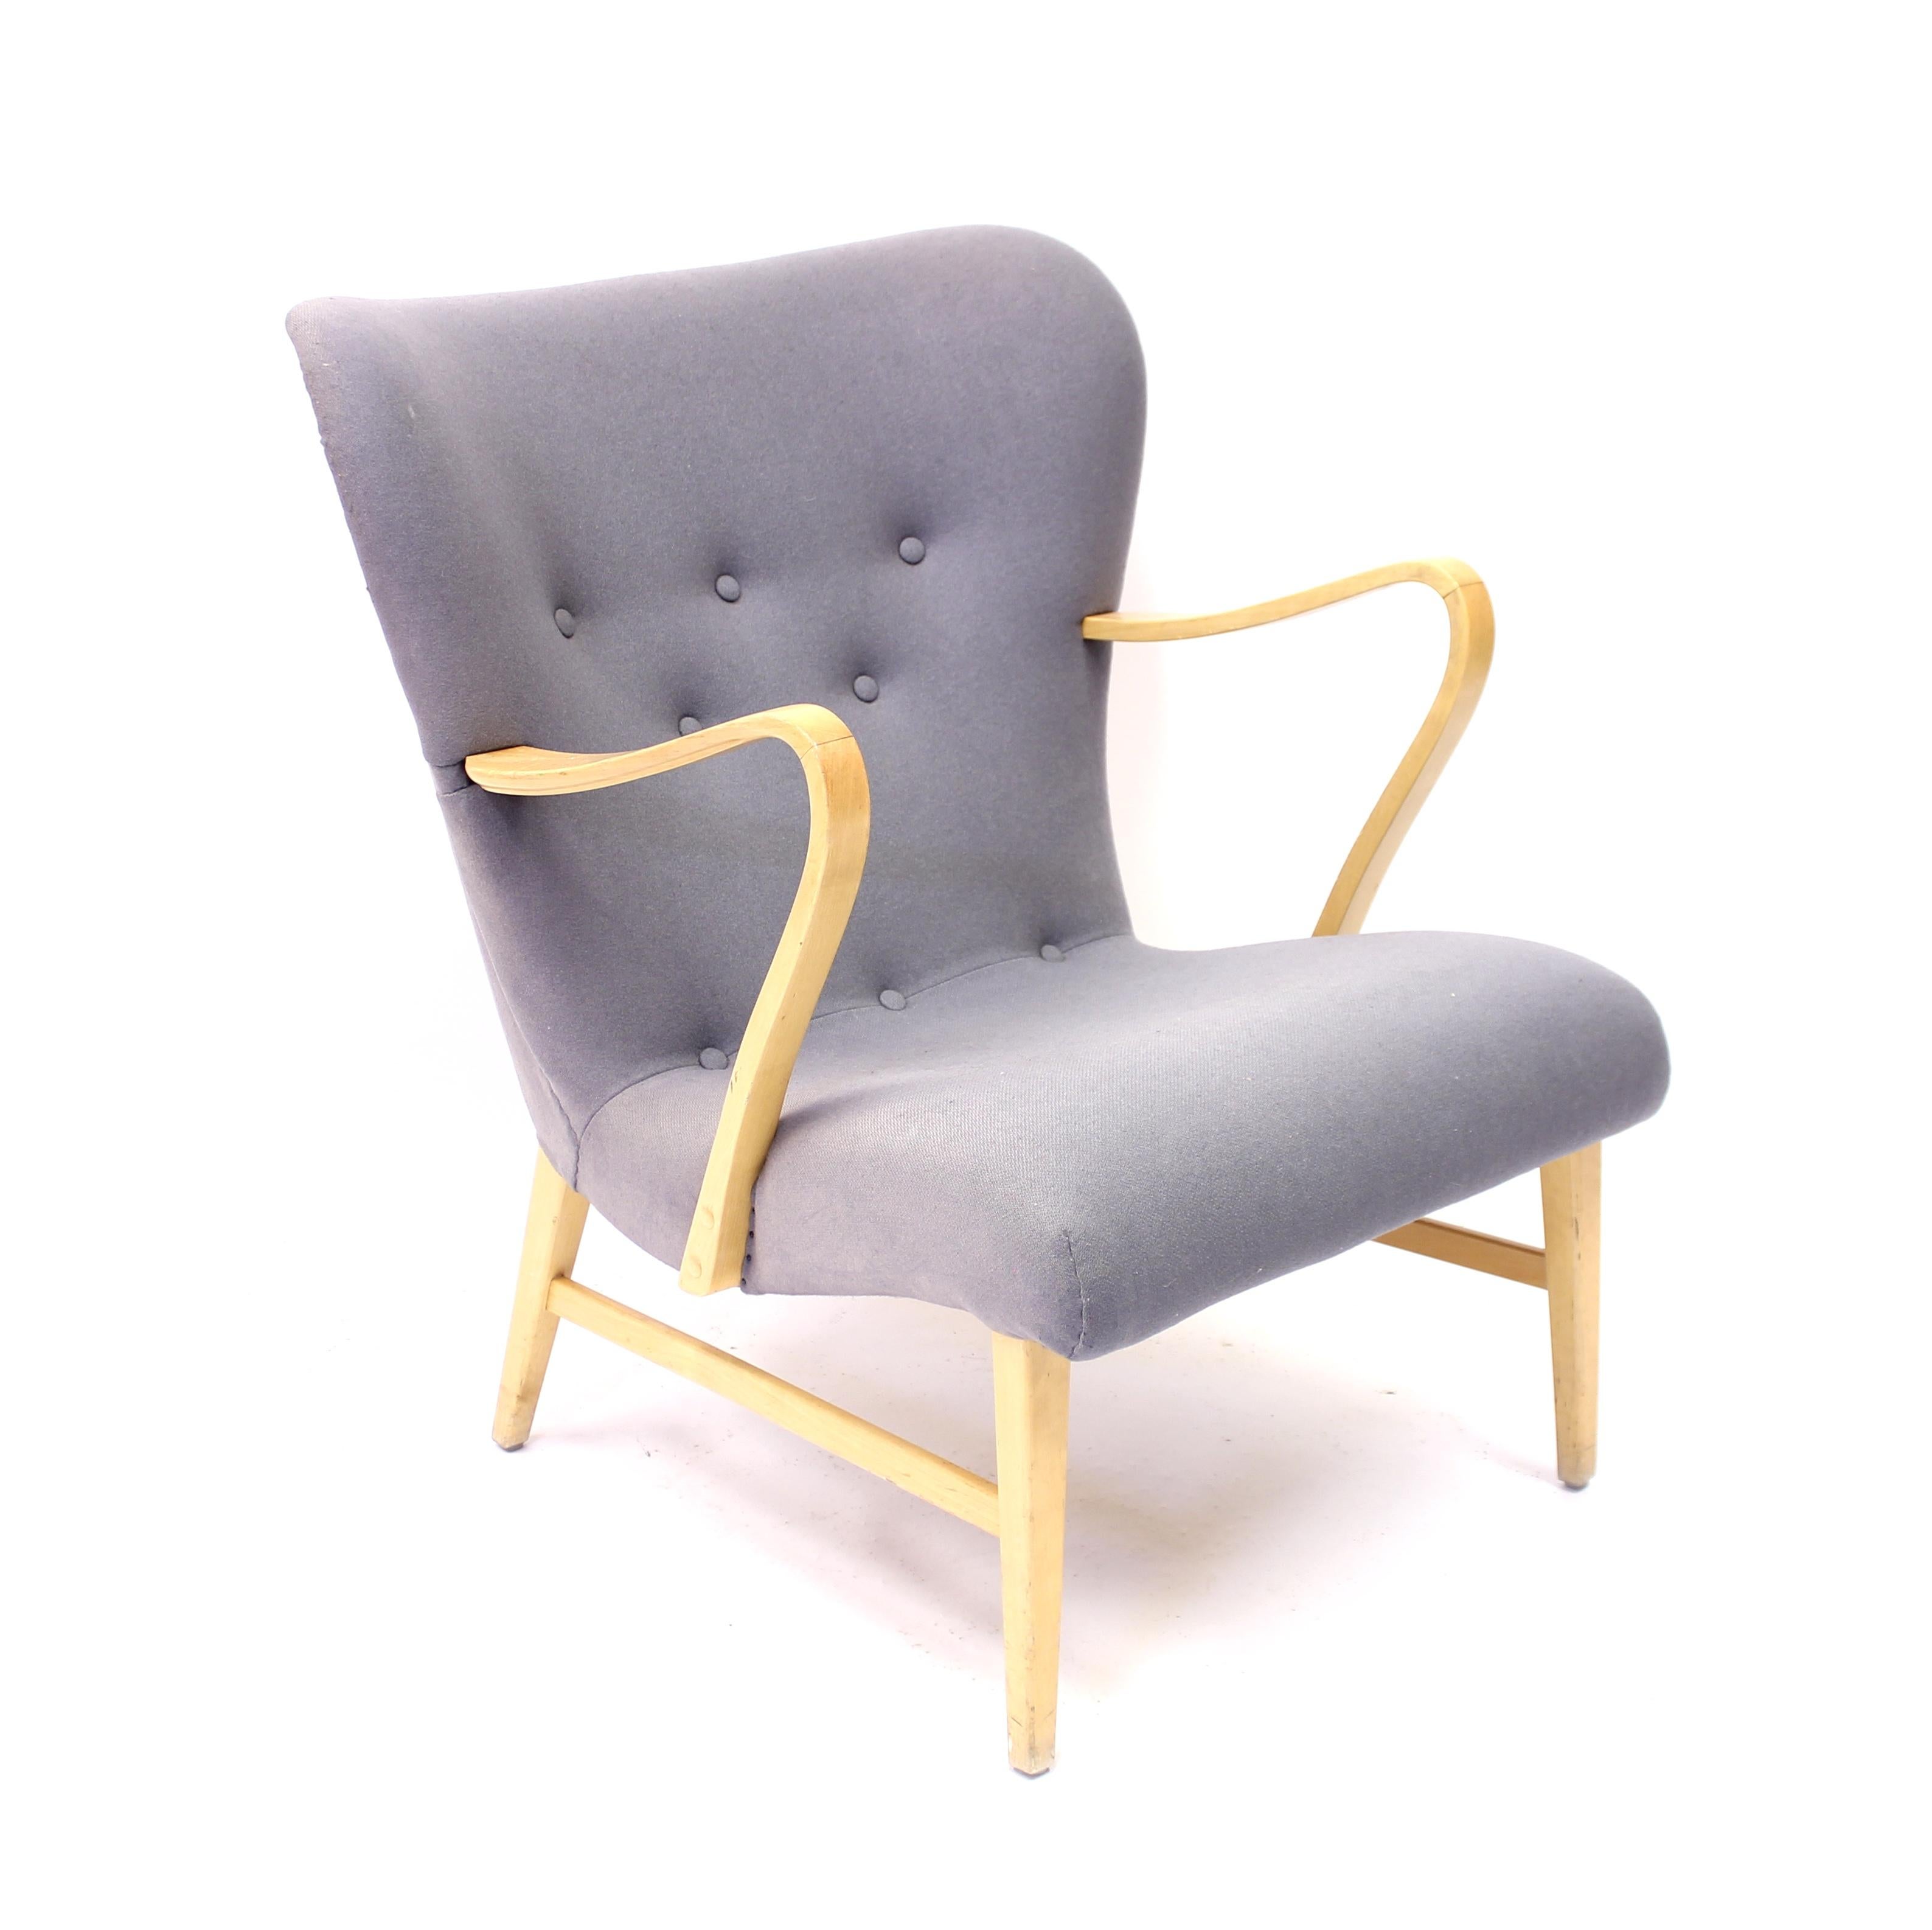 Midcentury Swedish modern curved easy chair, attributed to Swedish designer Erik Bertil Karlén, with a velvet like grey/blue upholstery. Legs and armrests of birch. The chair has a very light expression due to the quite thin legs and armrest. Good